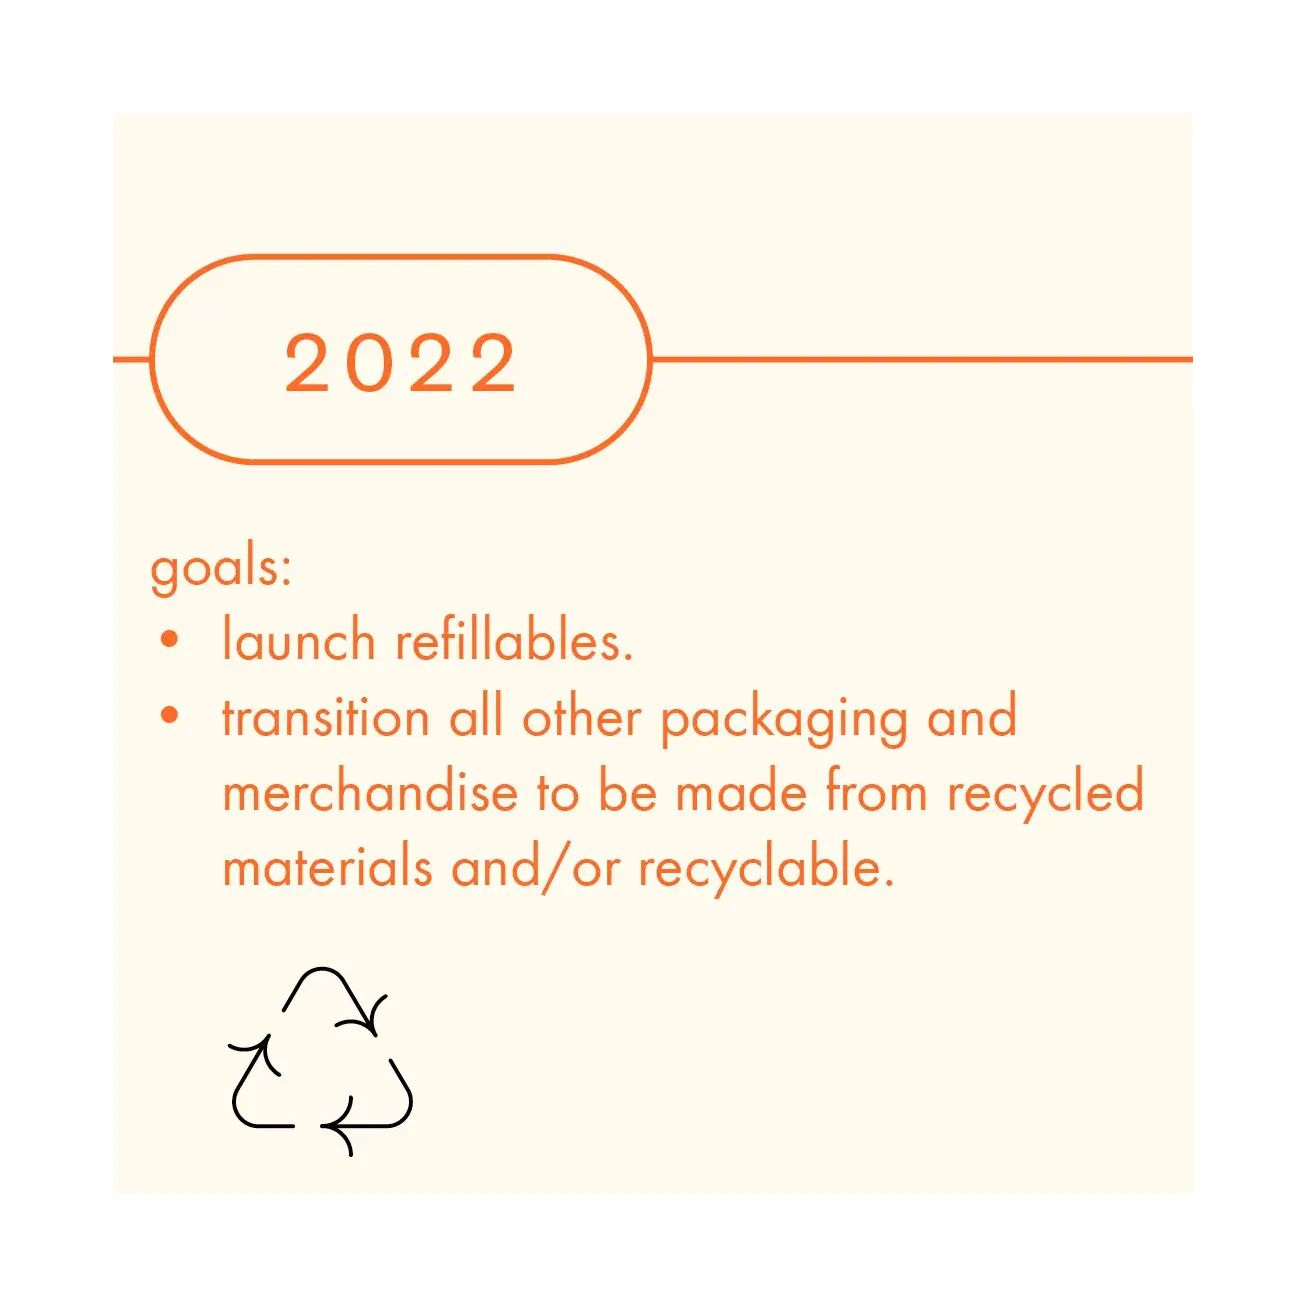 2022 sustainability goals: launch refillables and transition all other packaging and merchandise to be made from recycled materials and/or recyclable.